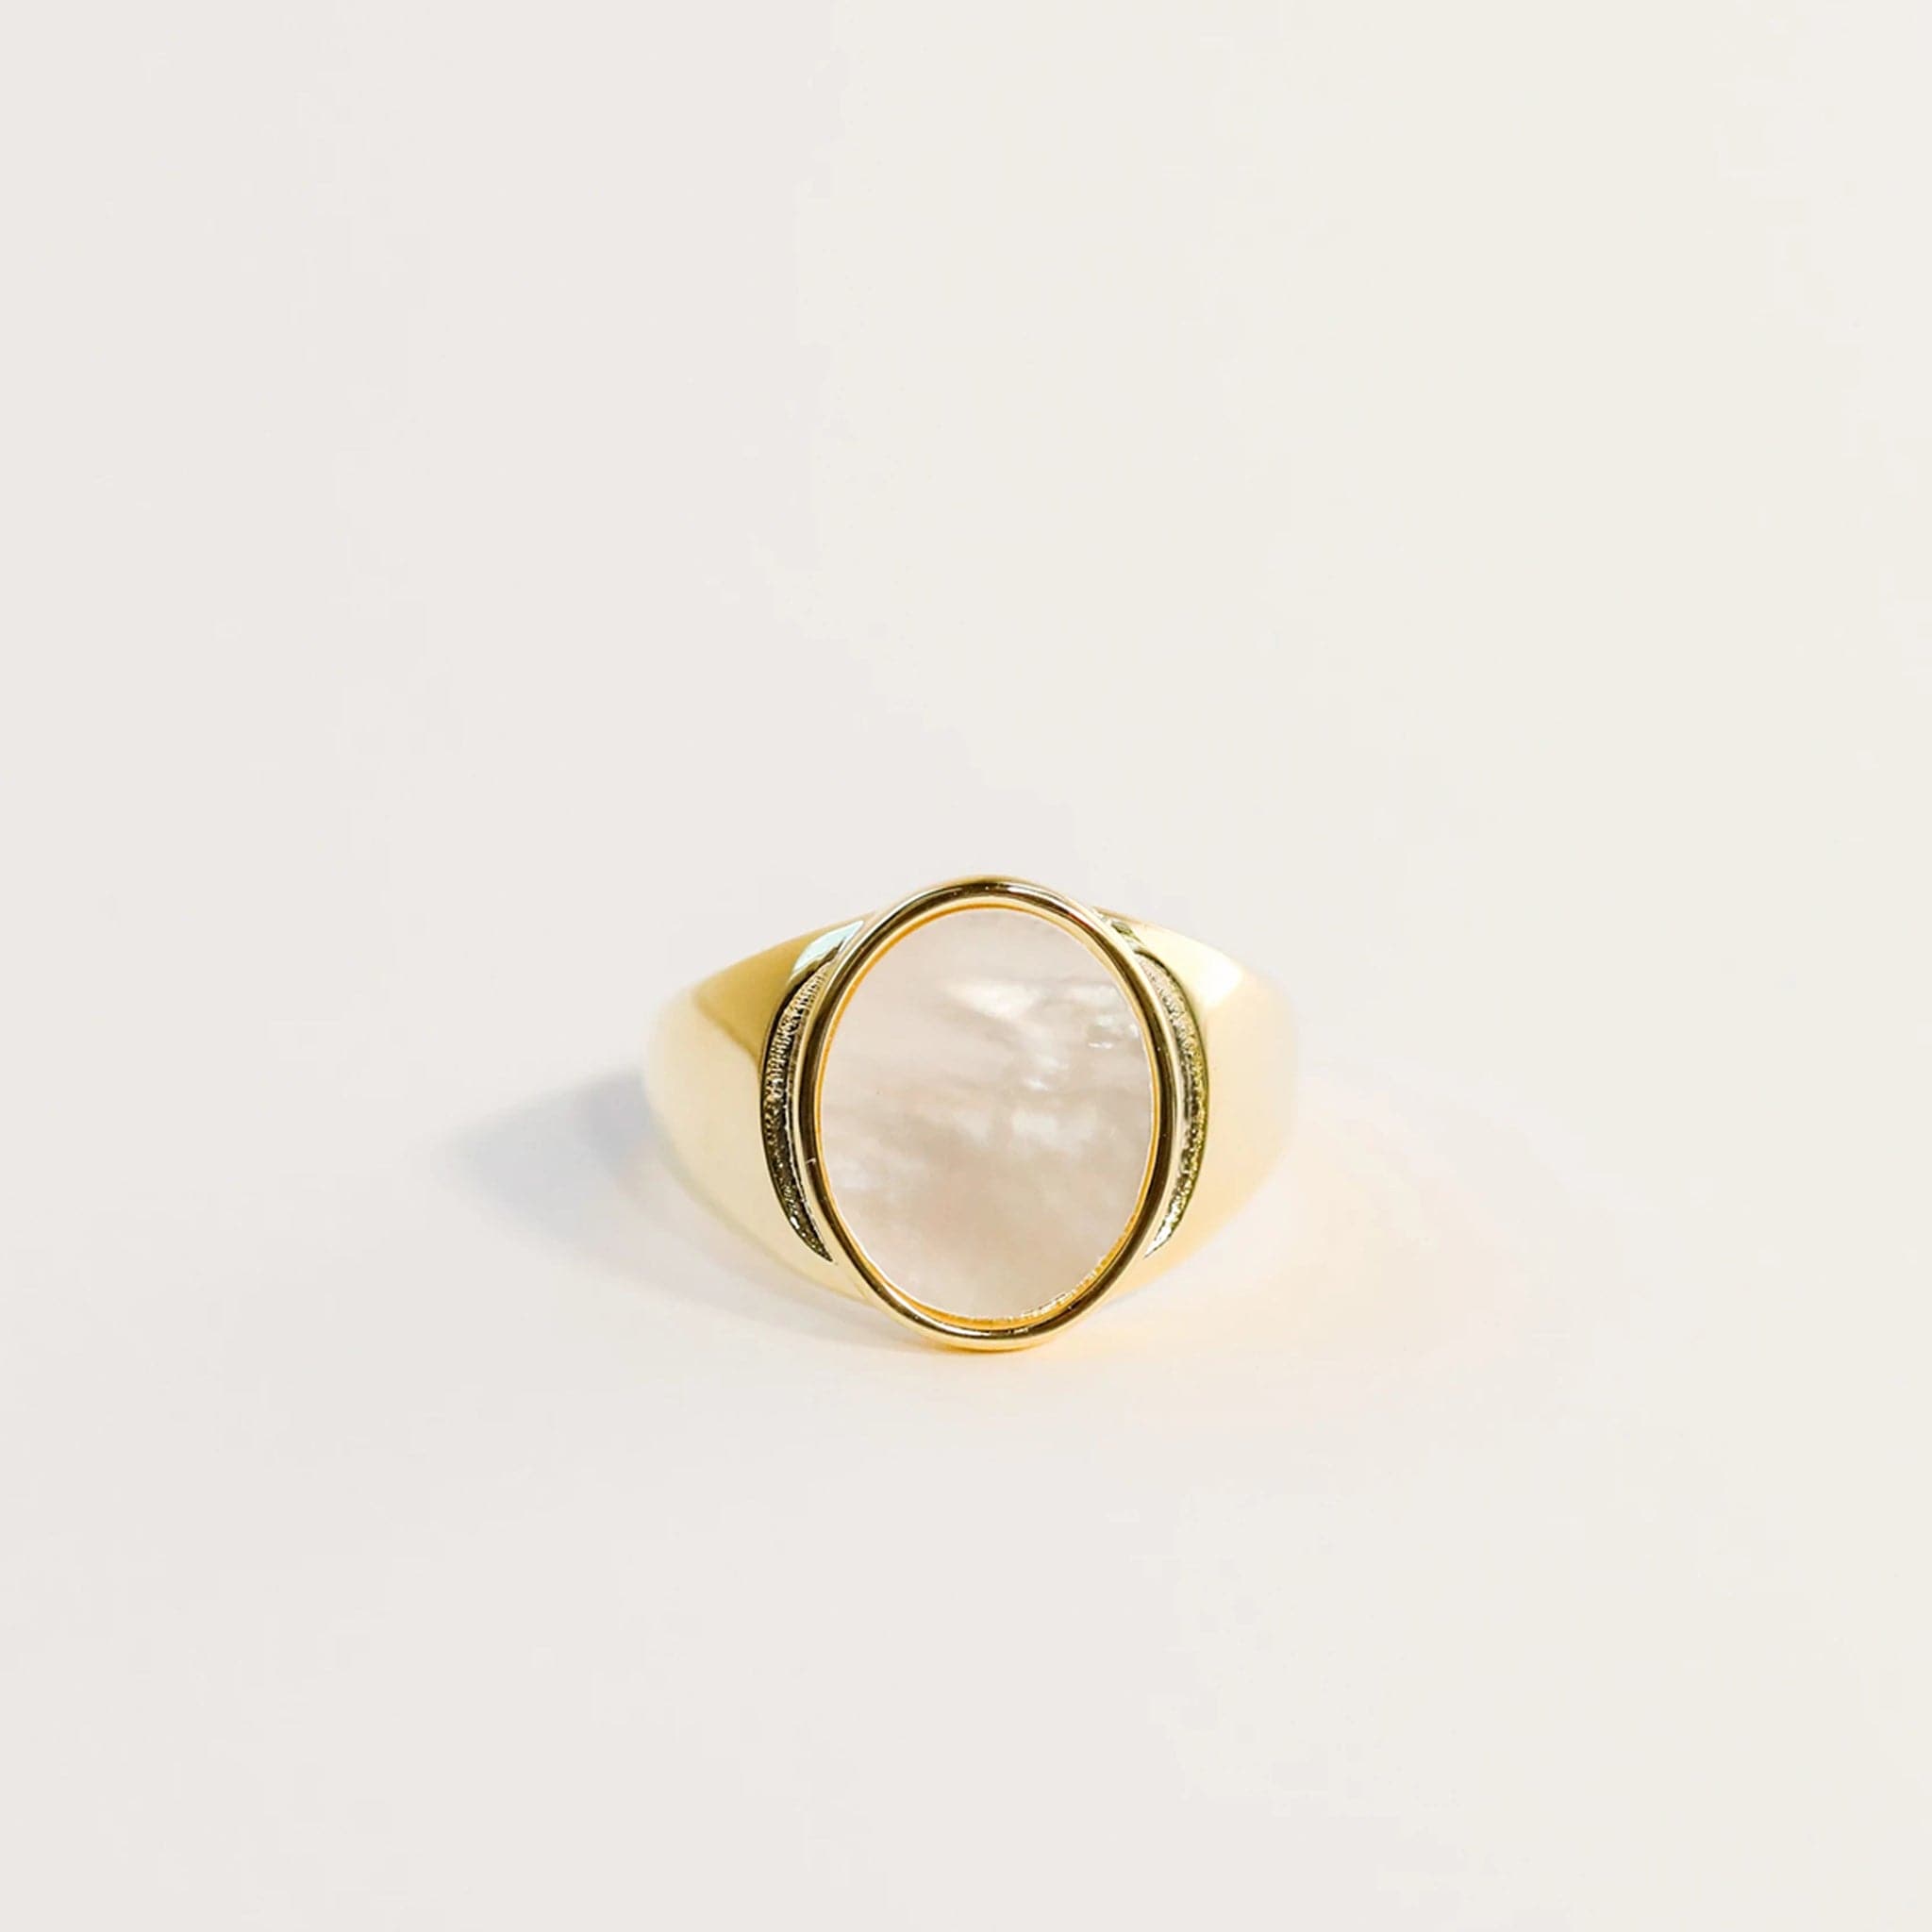 A statement gold signet ring with an oval mother of pearl stone set in the center.